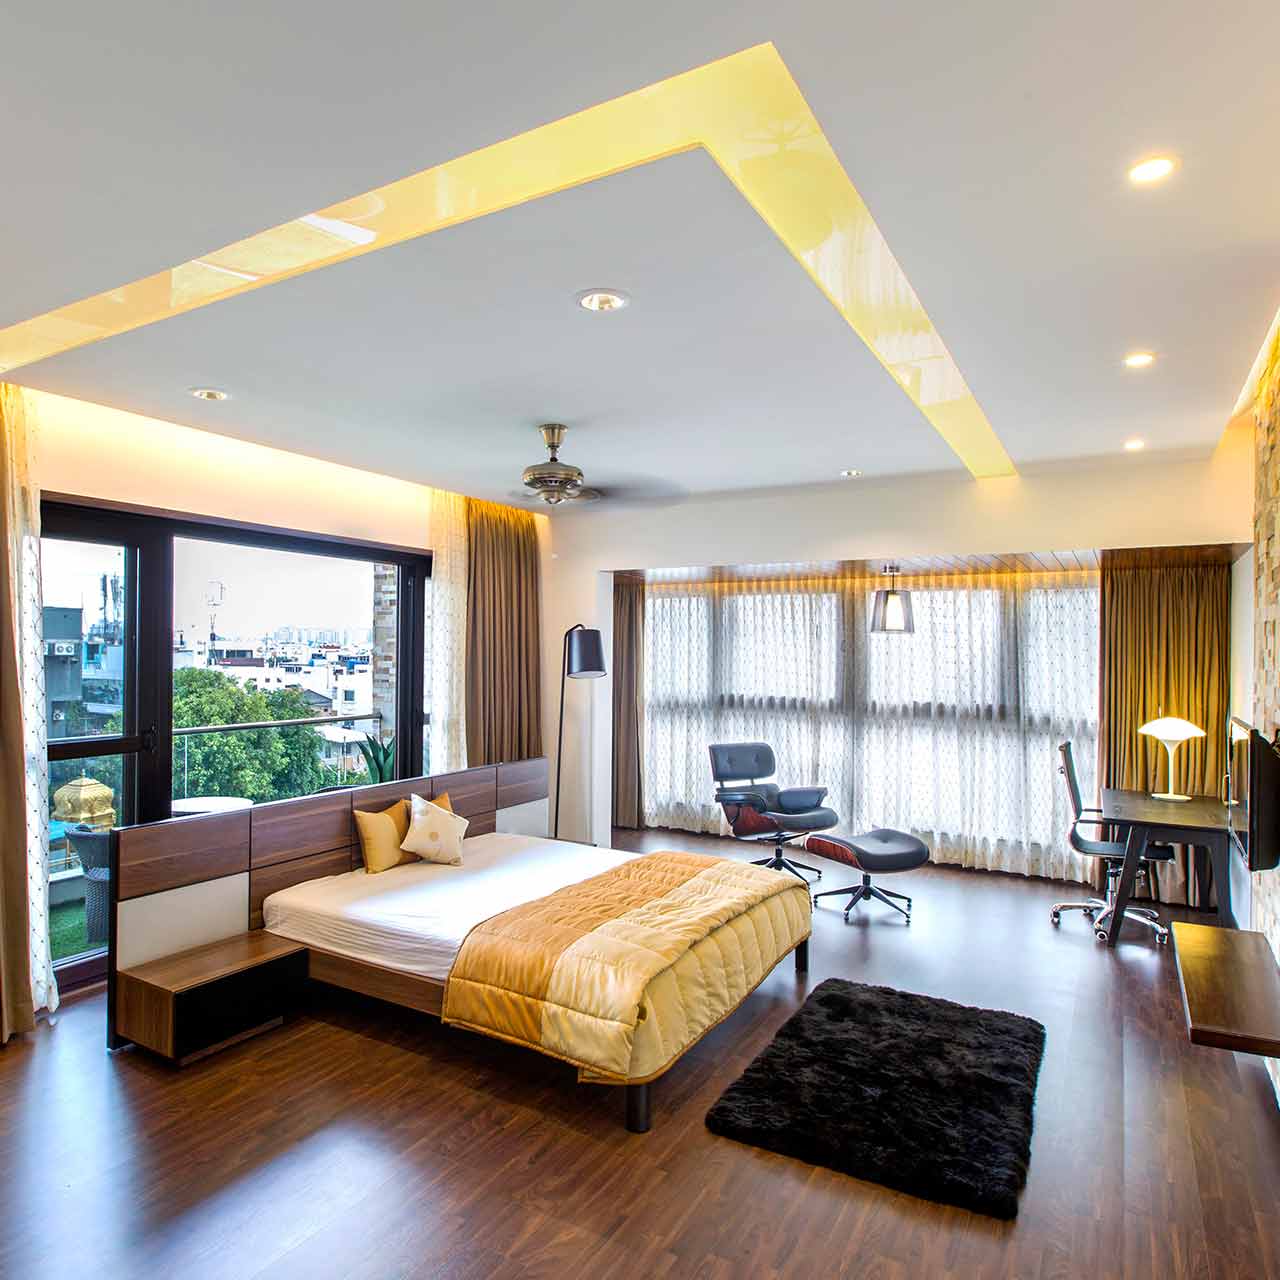 Contemporary style bedroom interior design is characterised by sleek and clean design 